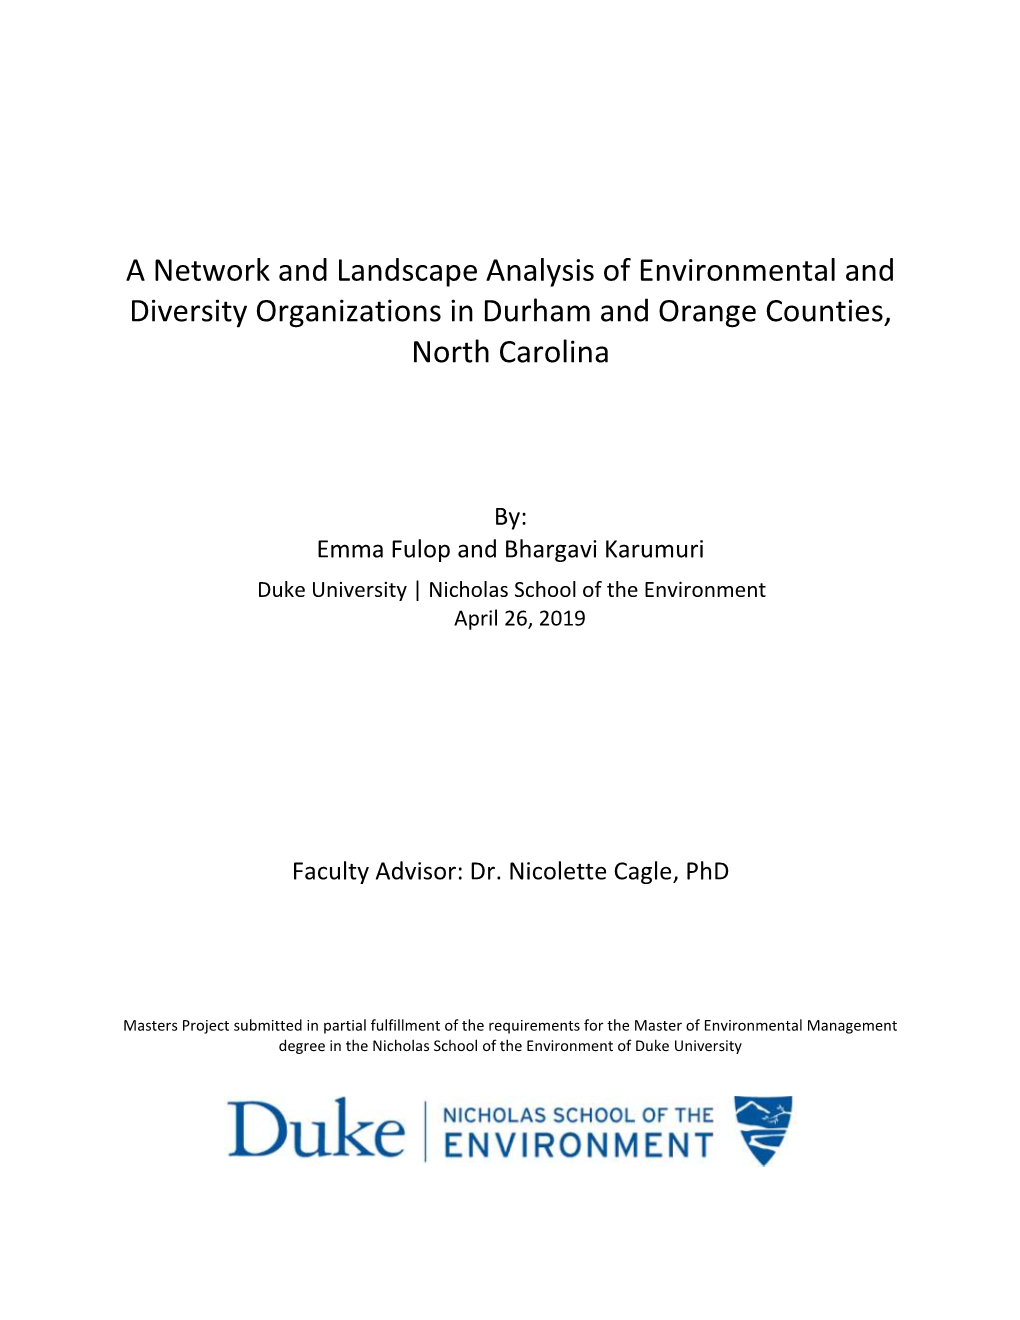 A Network and Landscape Analysis of Environmental and Diversity Organizations in Durham and Orange Counties, North Carolina